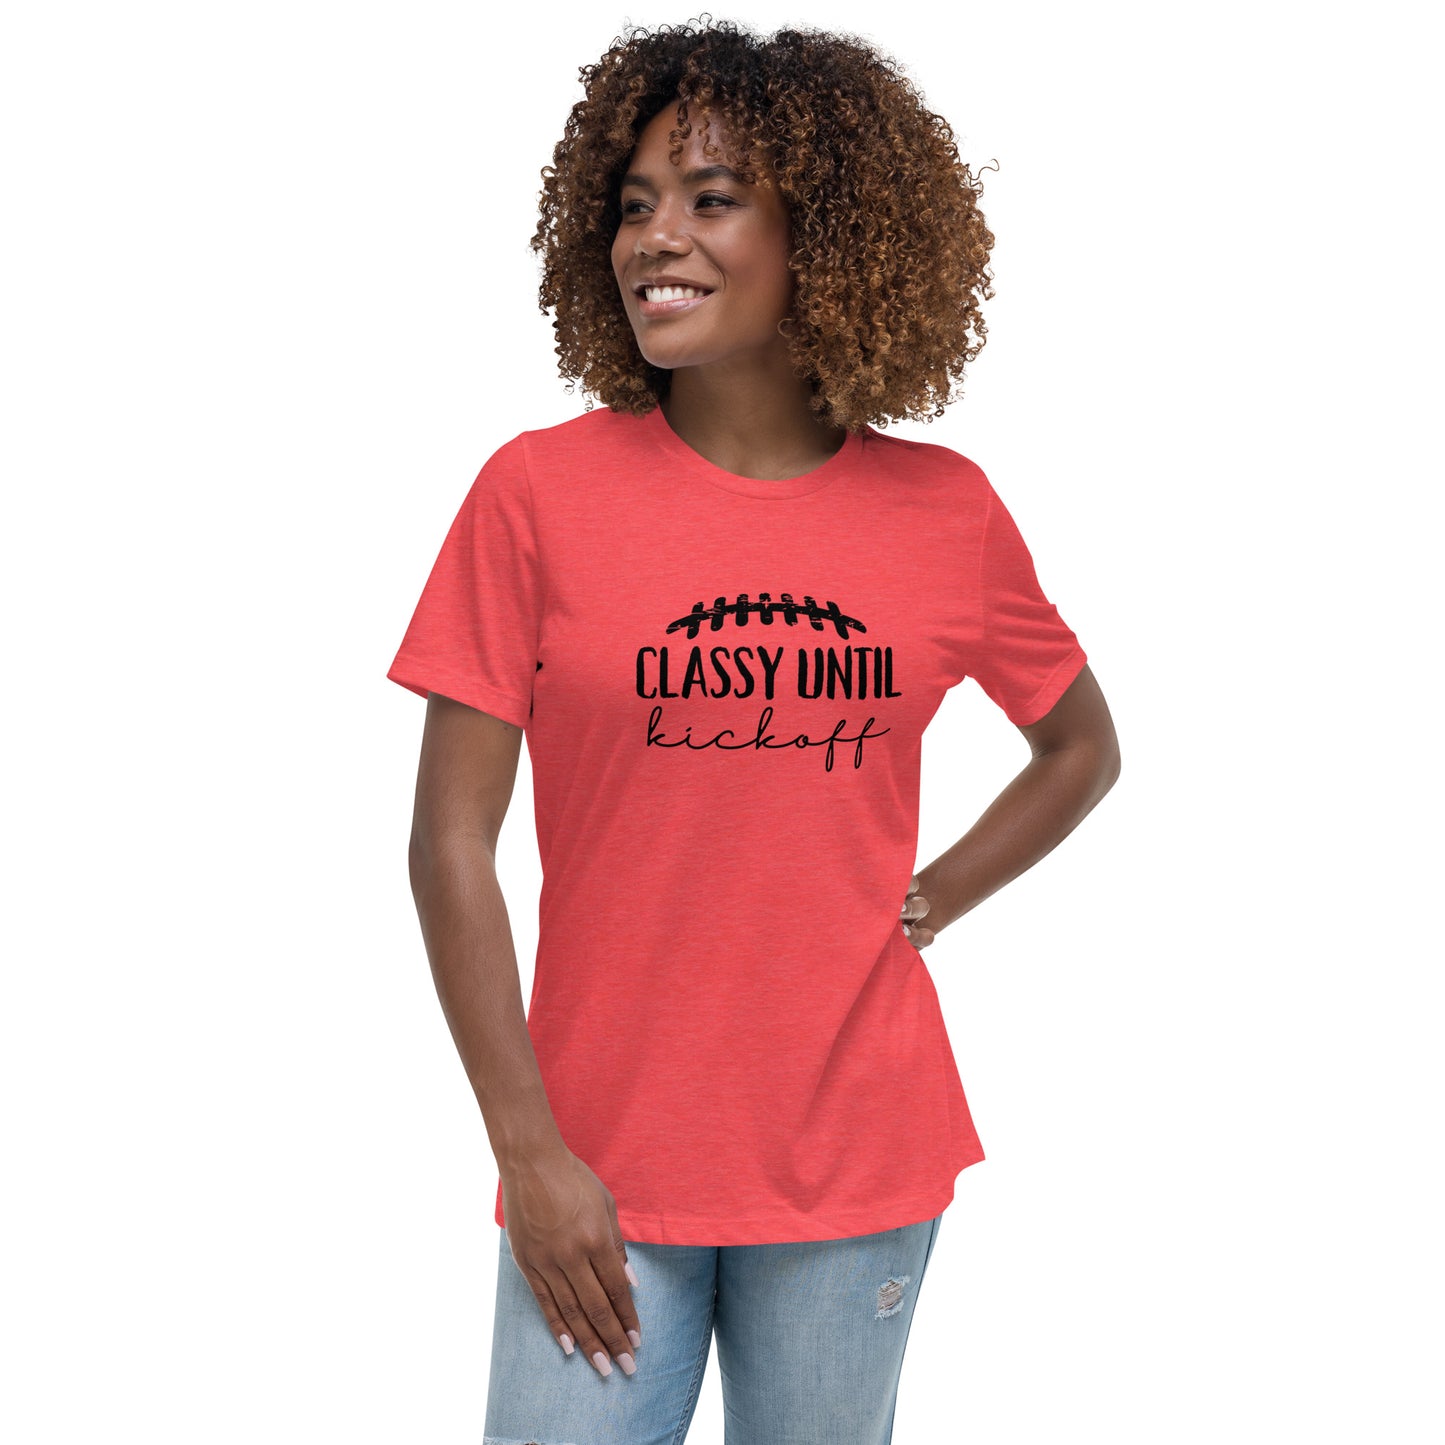 "Classy until kickoff" Women's Relaxed T-Shirt